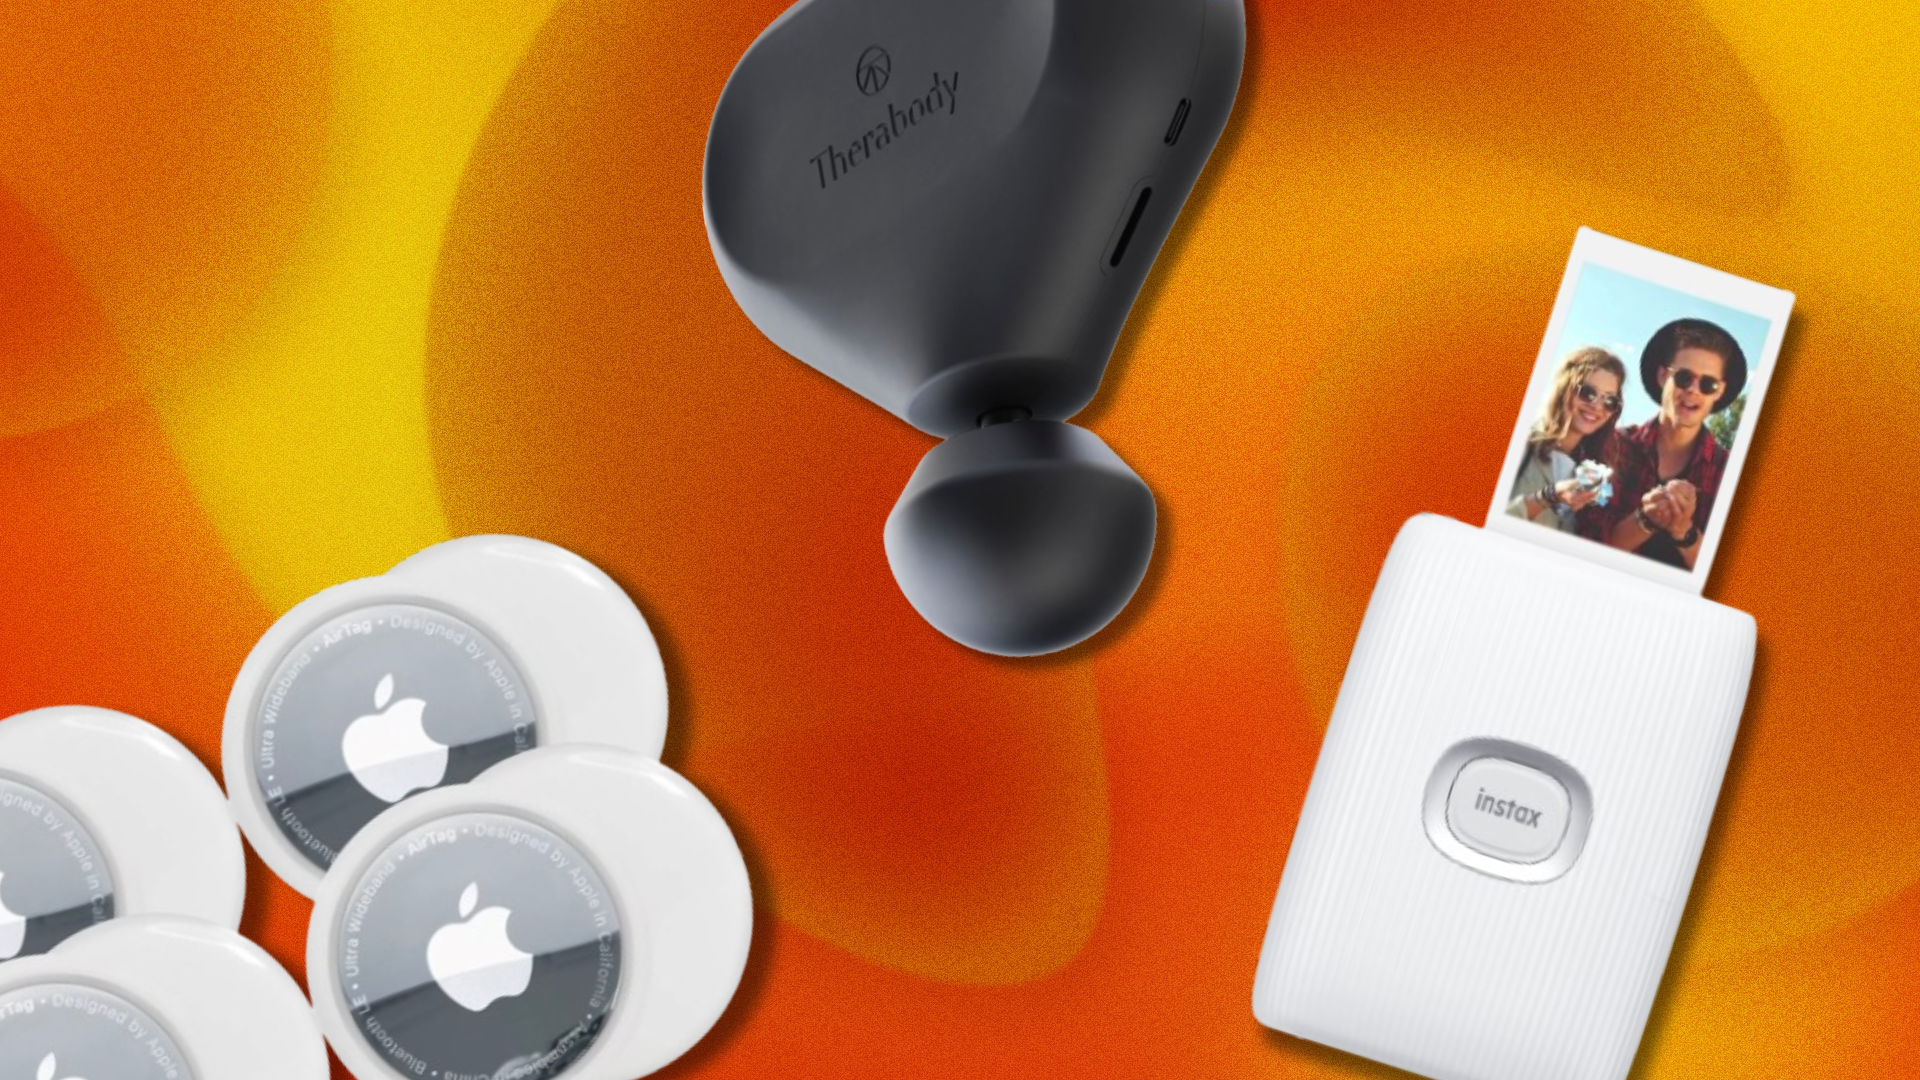 Products from Apple, Fujifilm, and Therabody overlaid on a yellow and orange background